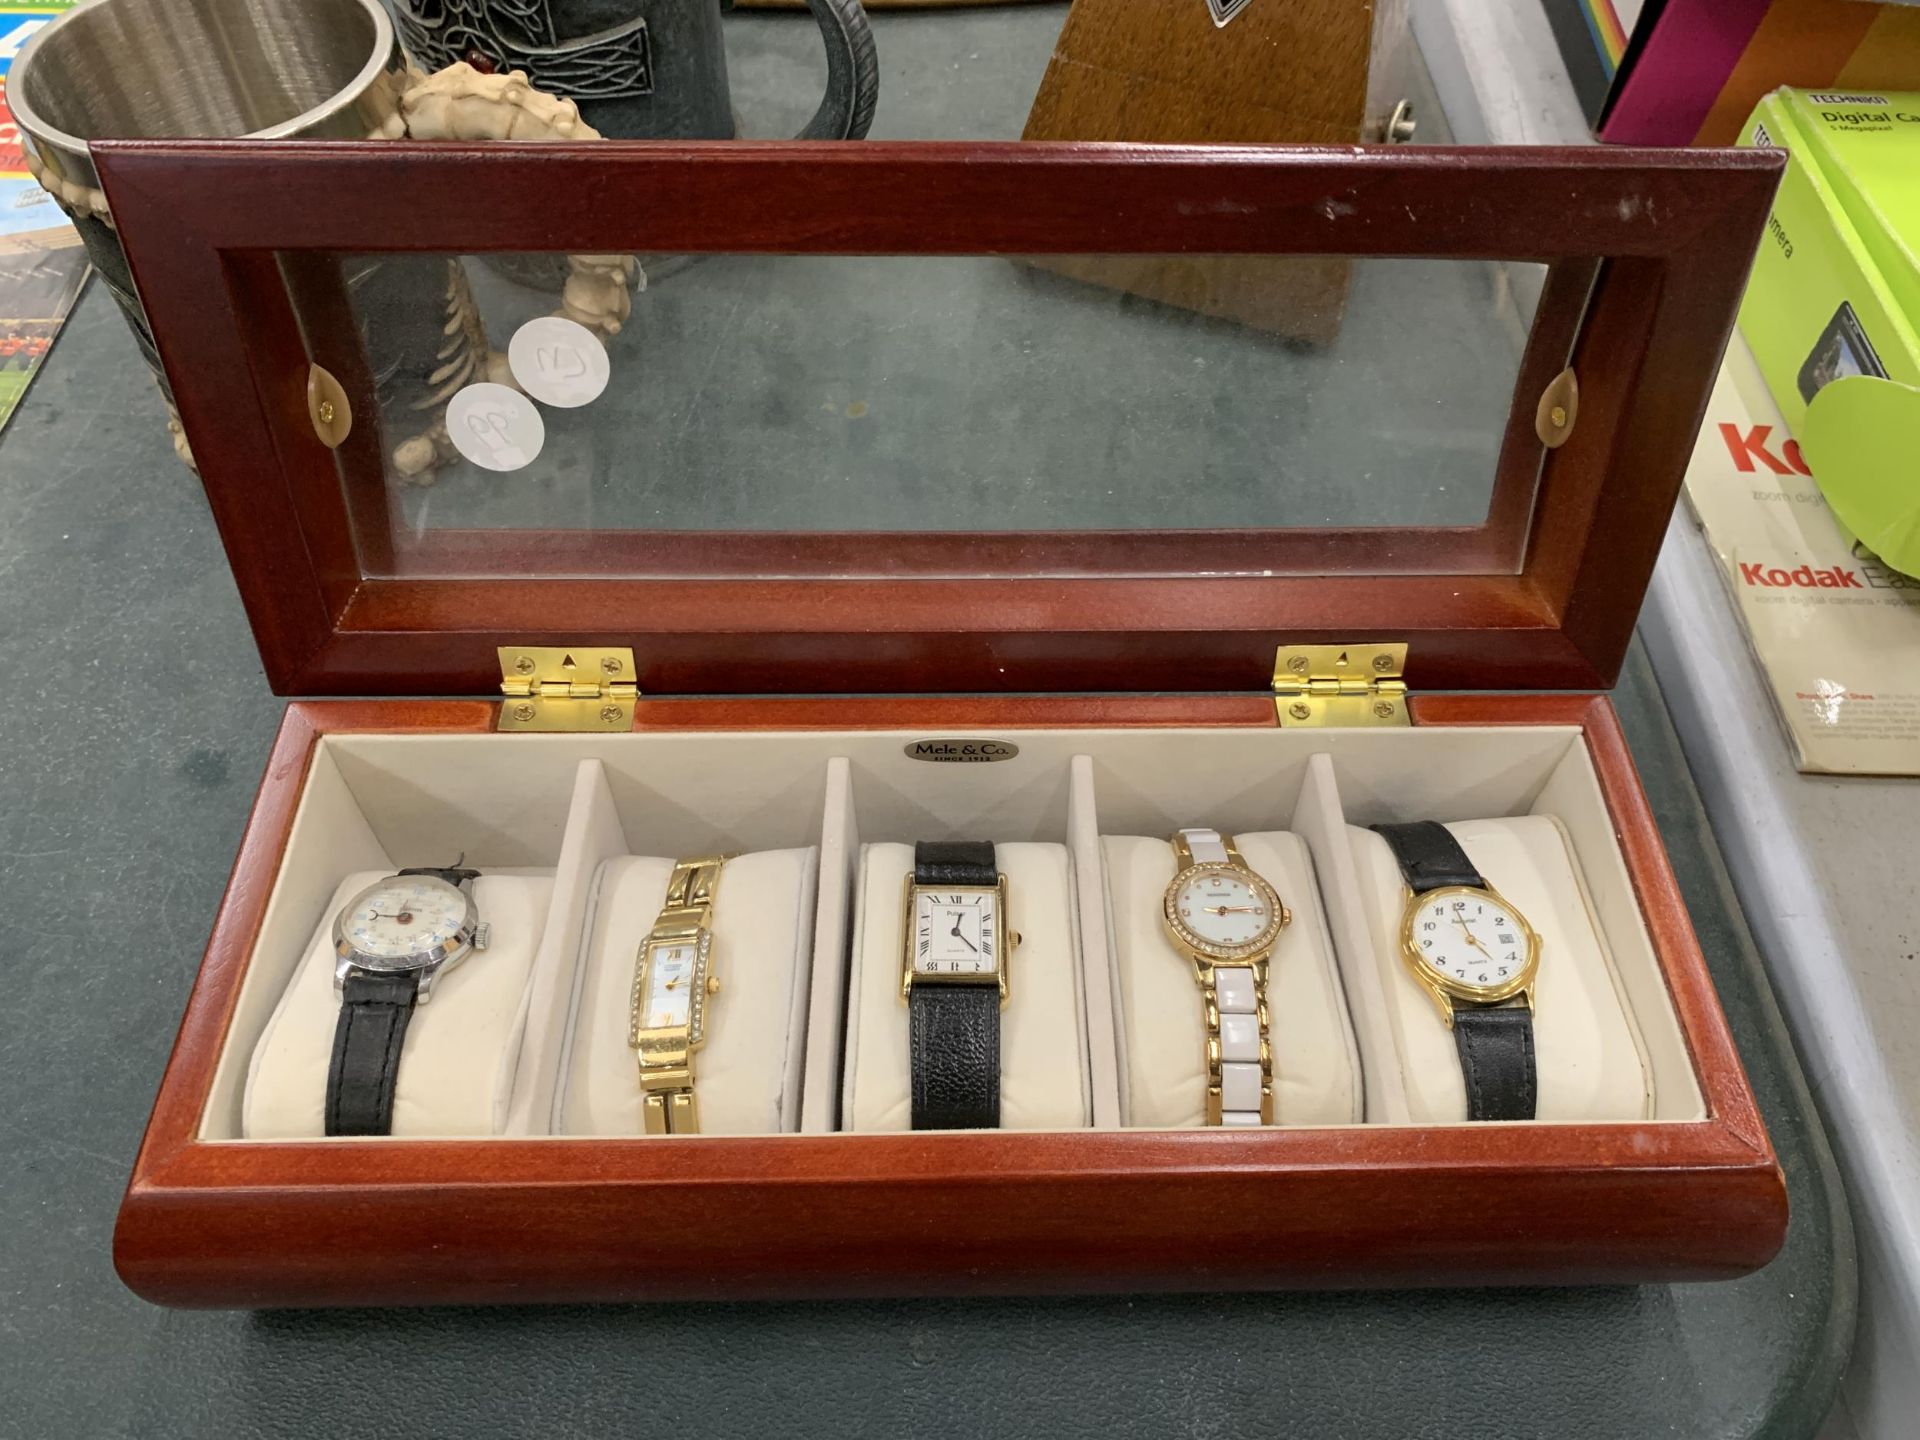 FIVE LADIES WRISTWATCHES IN A WOODEN CASE